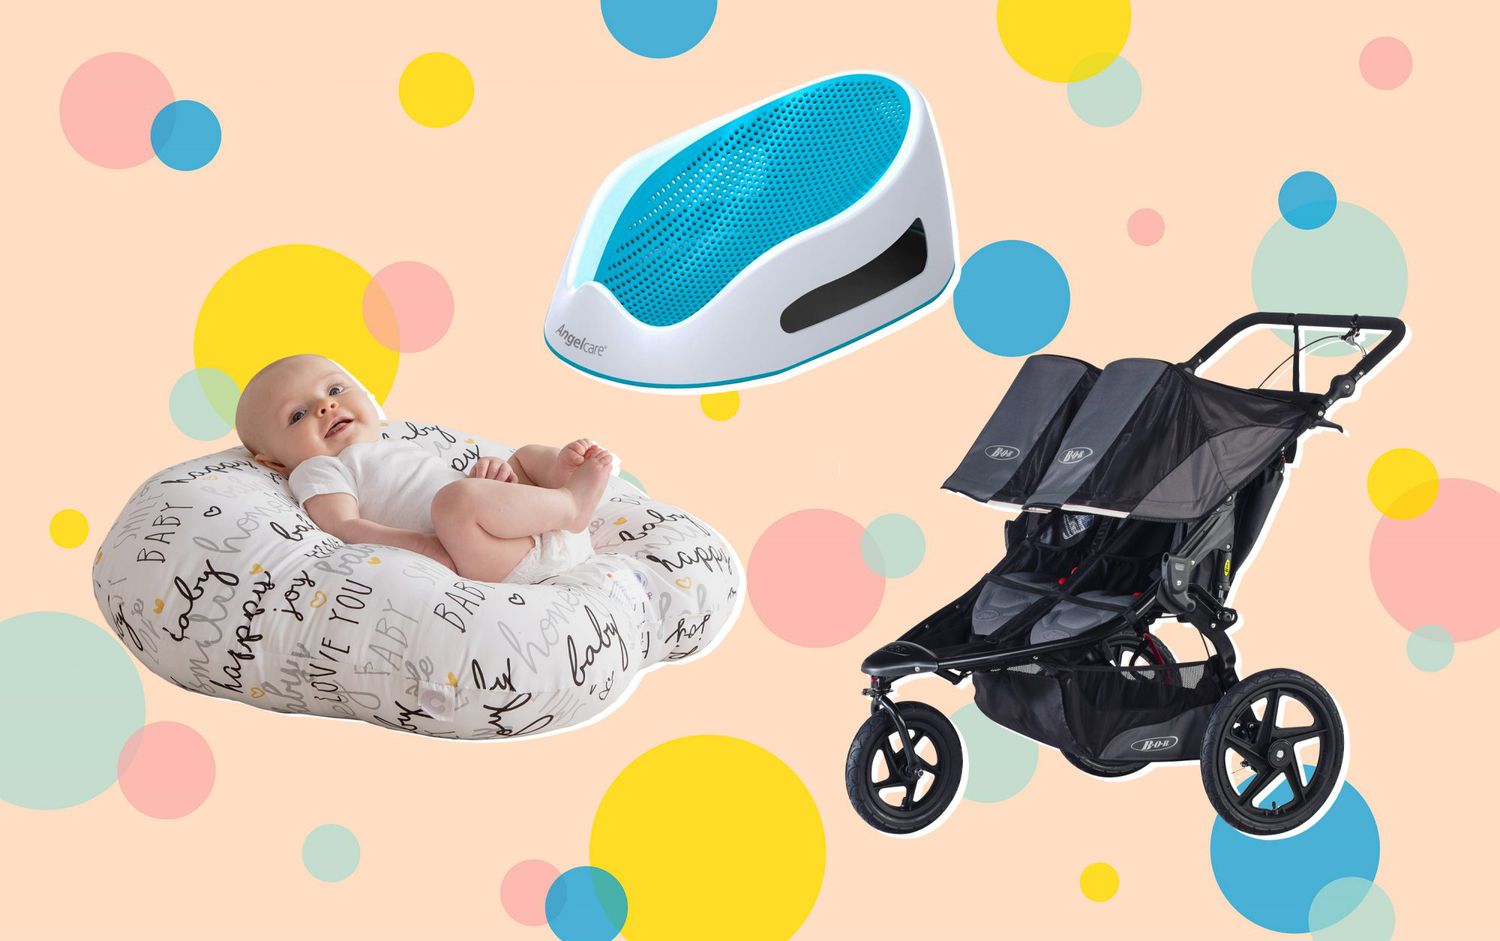 newborn gifts for mom